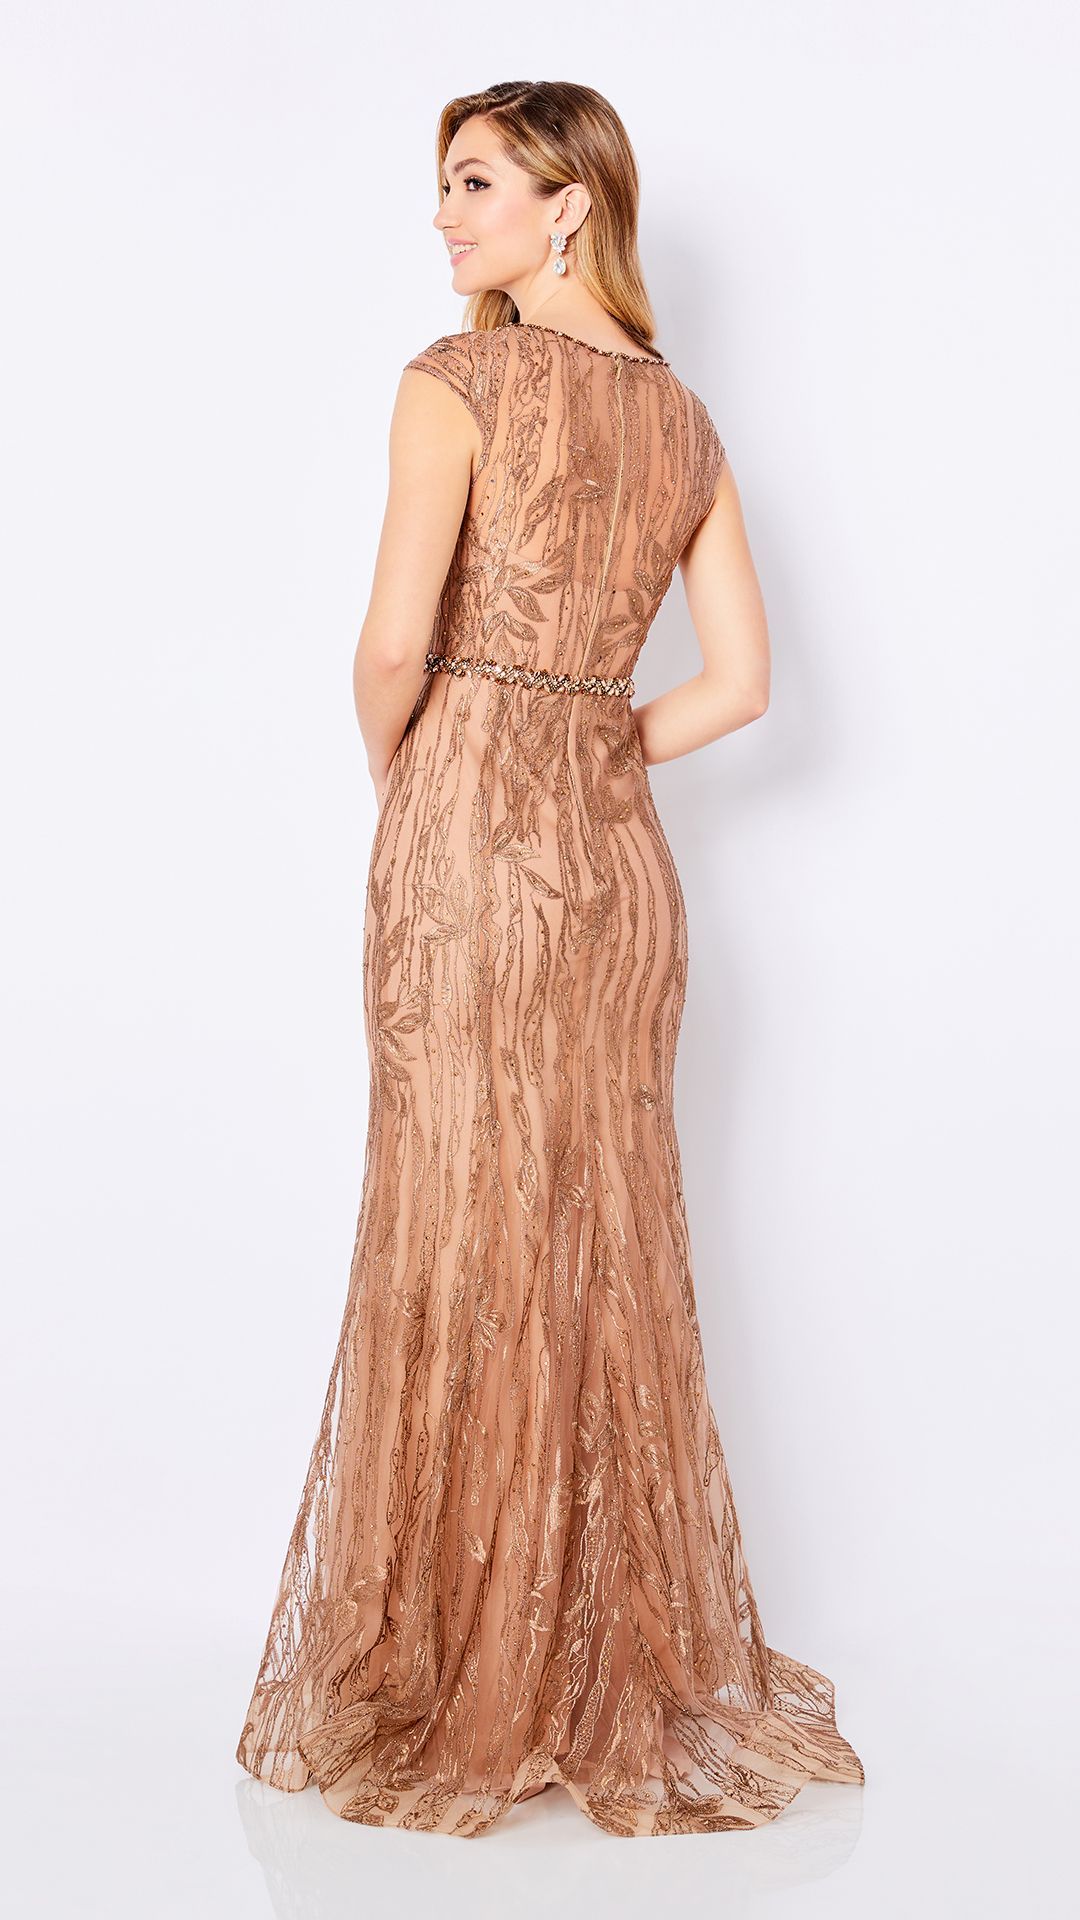 The back of a woman wearing a long gold dress.